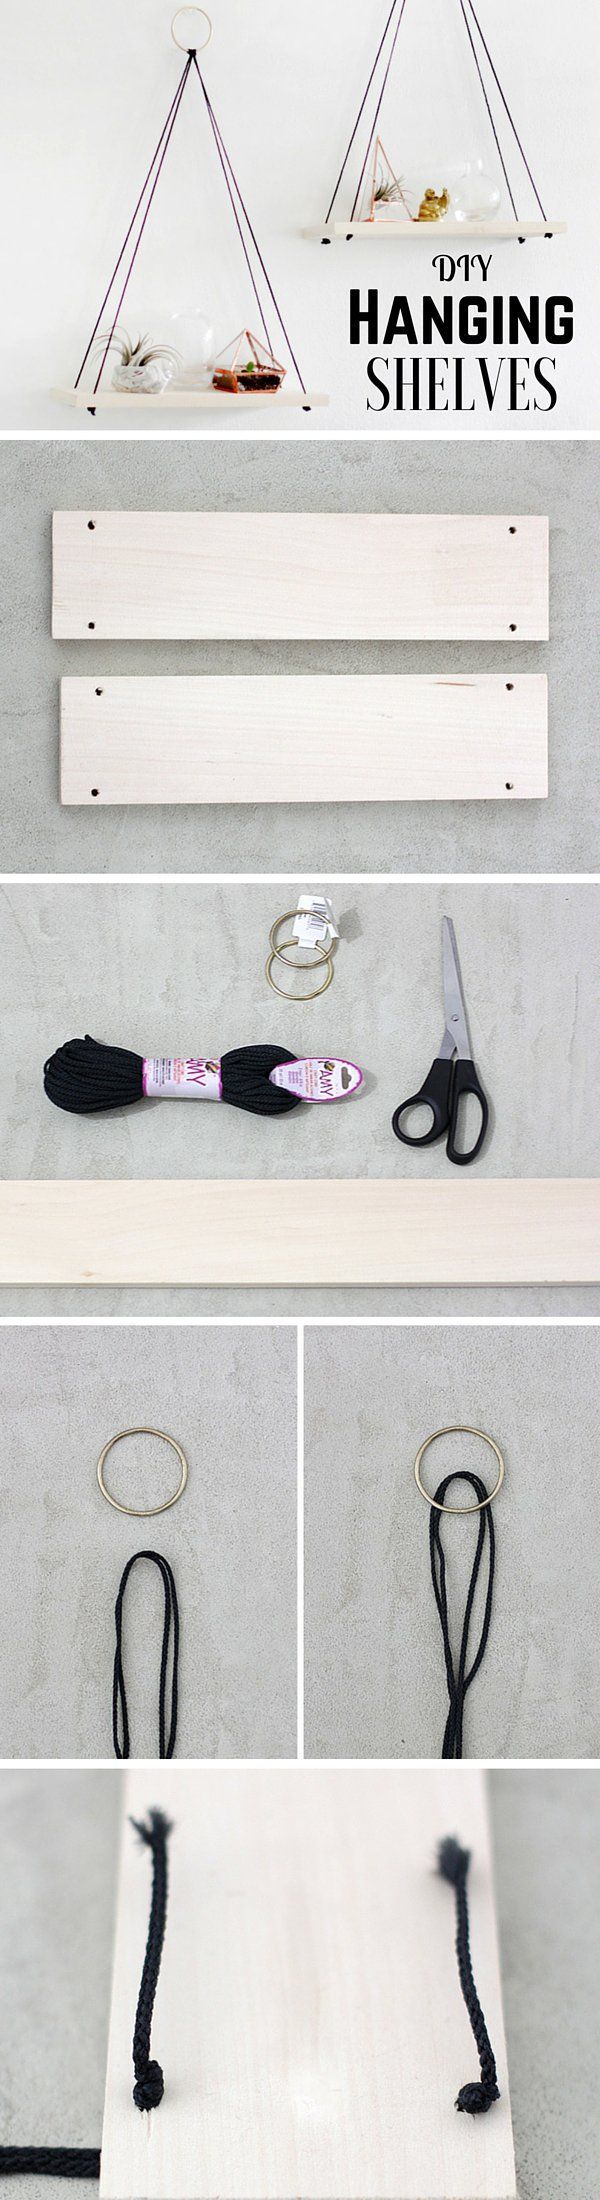 Check out the tutorial: #DIY Hanging Shelves | decor project